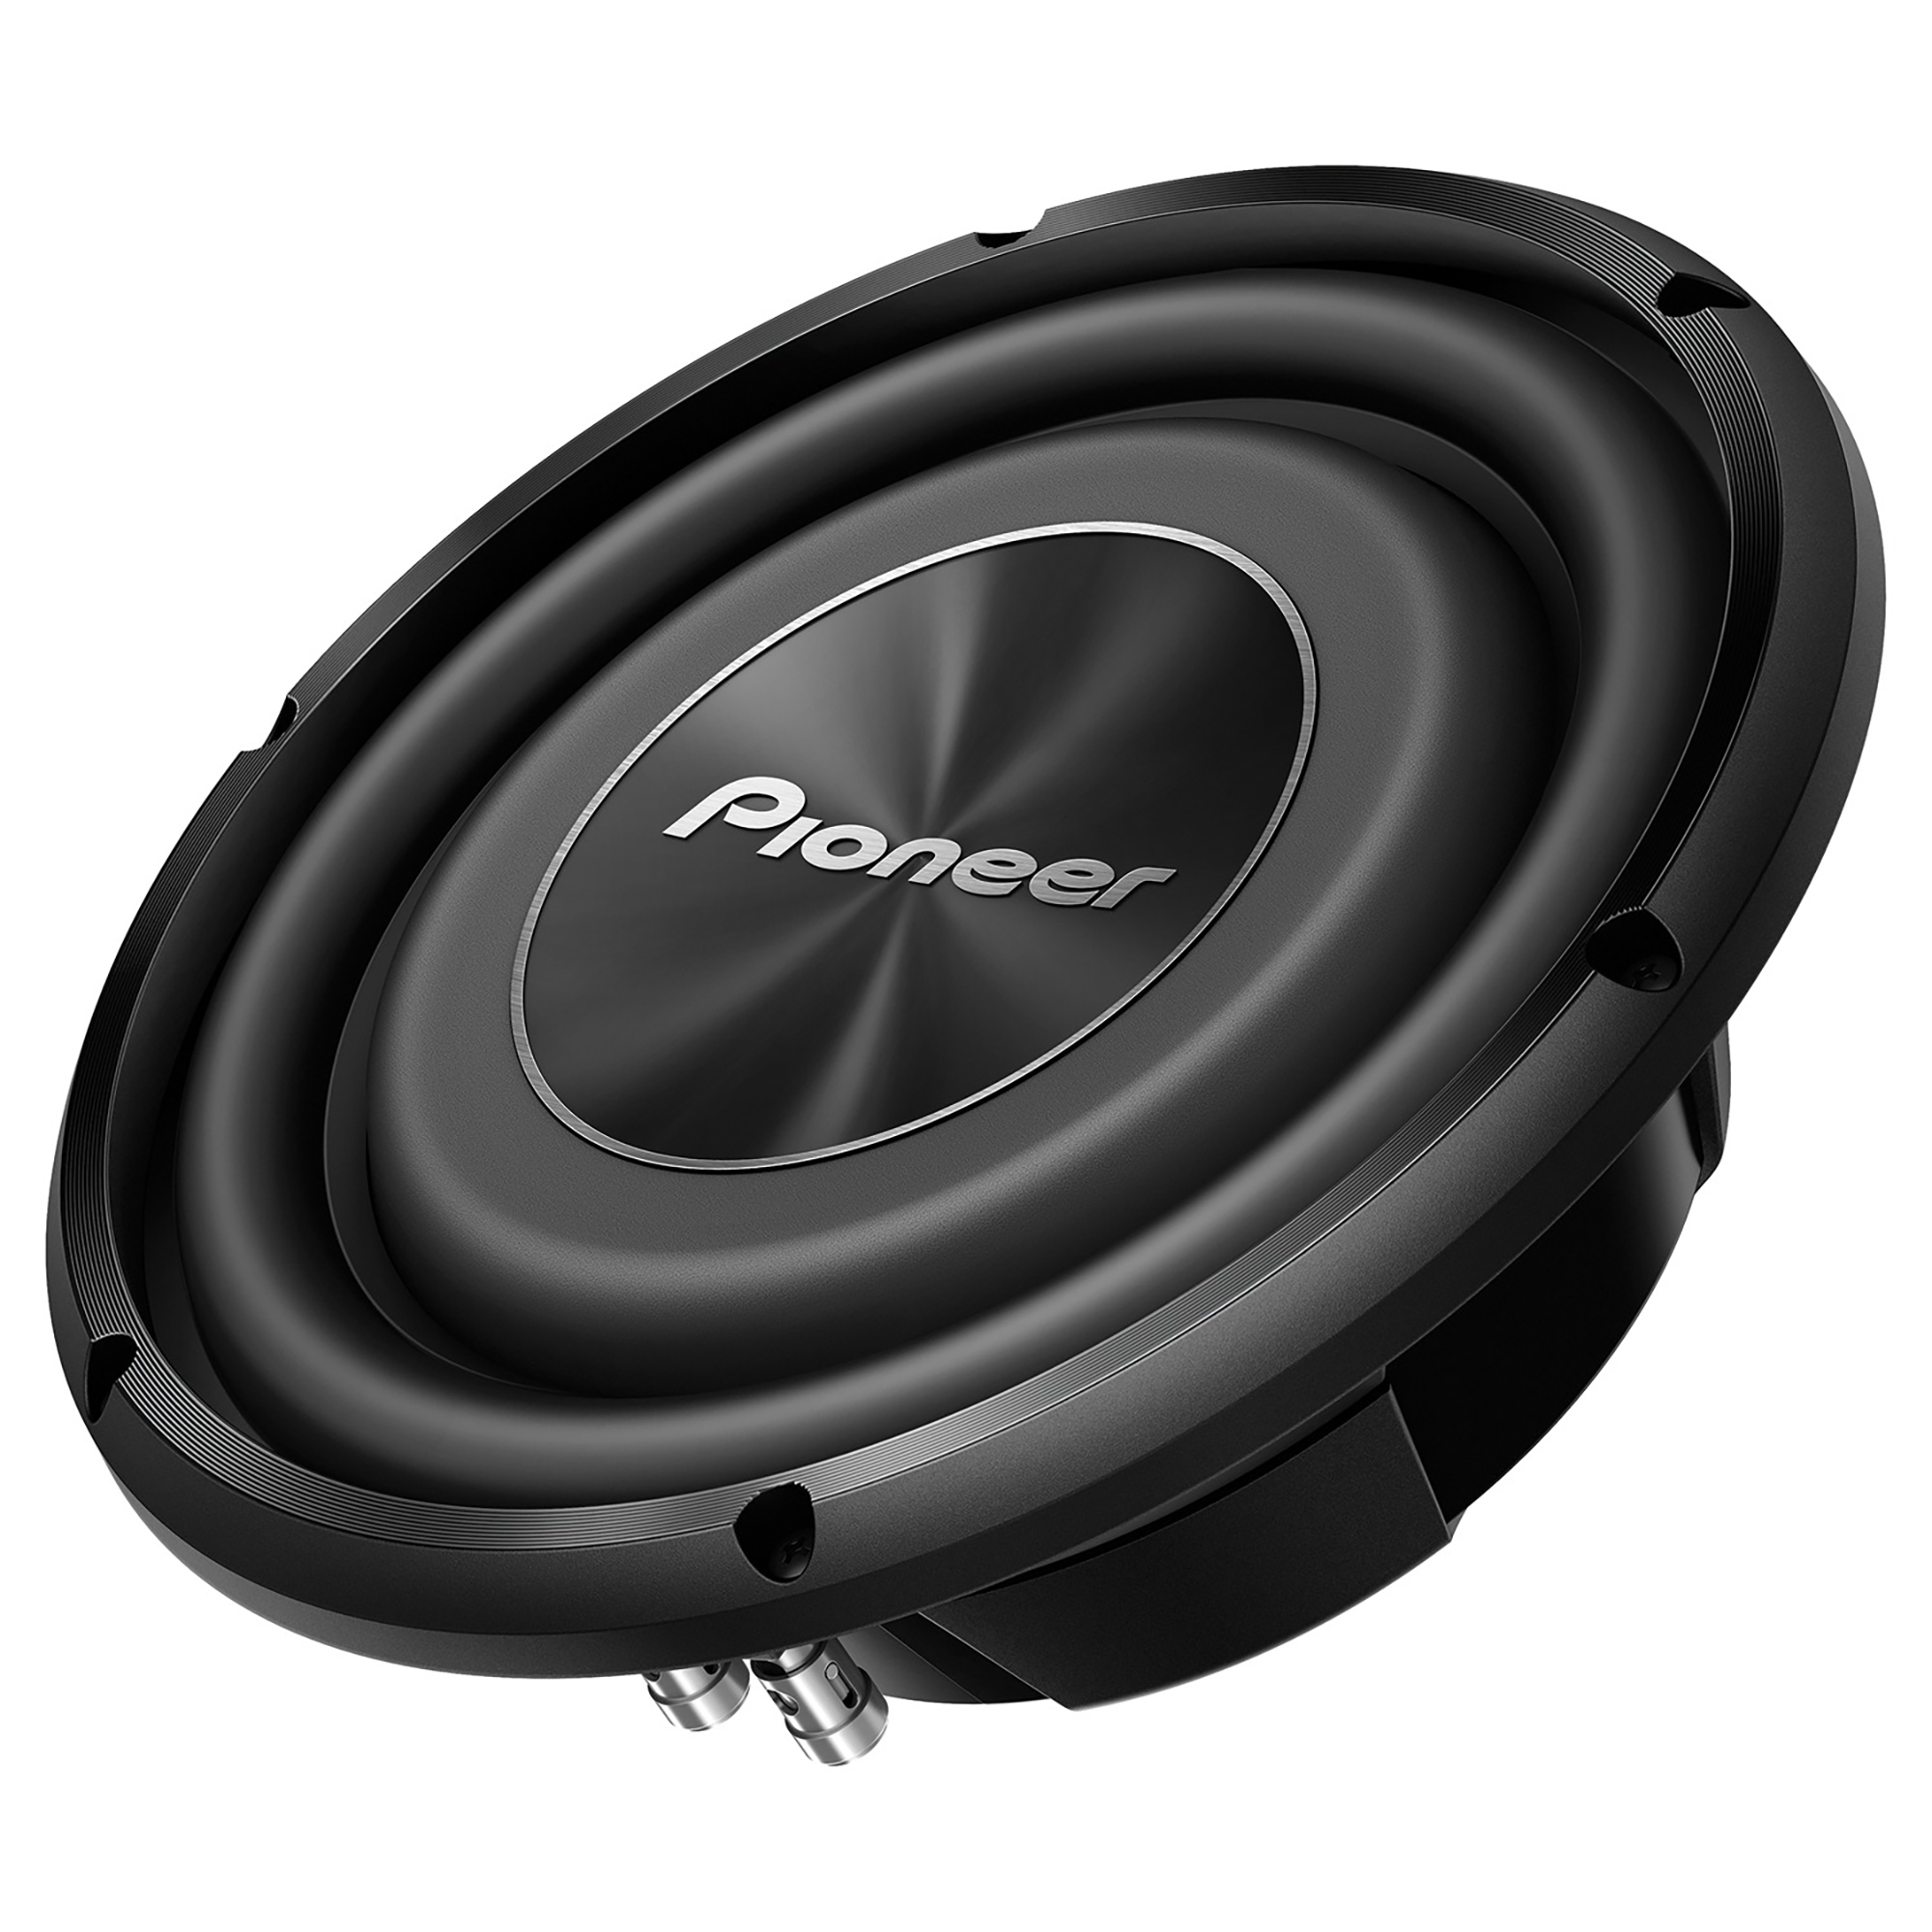 Pioneer A-Series, Shallow-Mount Subwoofer, Model TS-A2500LS4